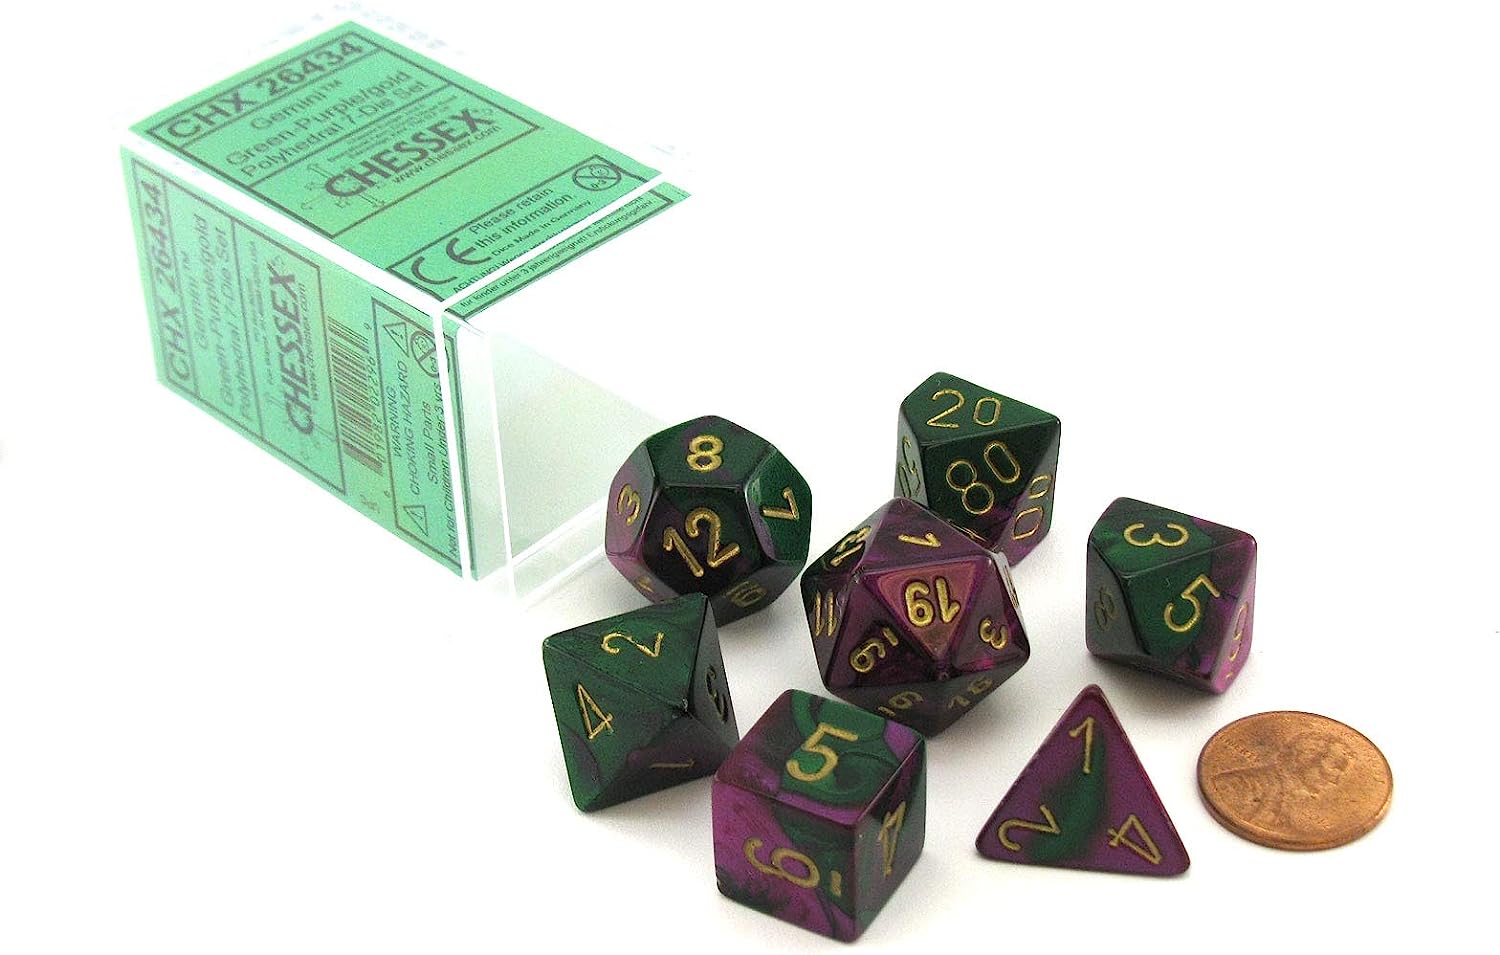 Chessex Polyhedral 7-Die Gemini Dice Set - Green & Purple with Gold CHX-26434